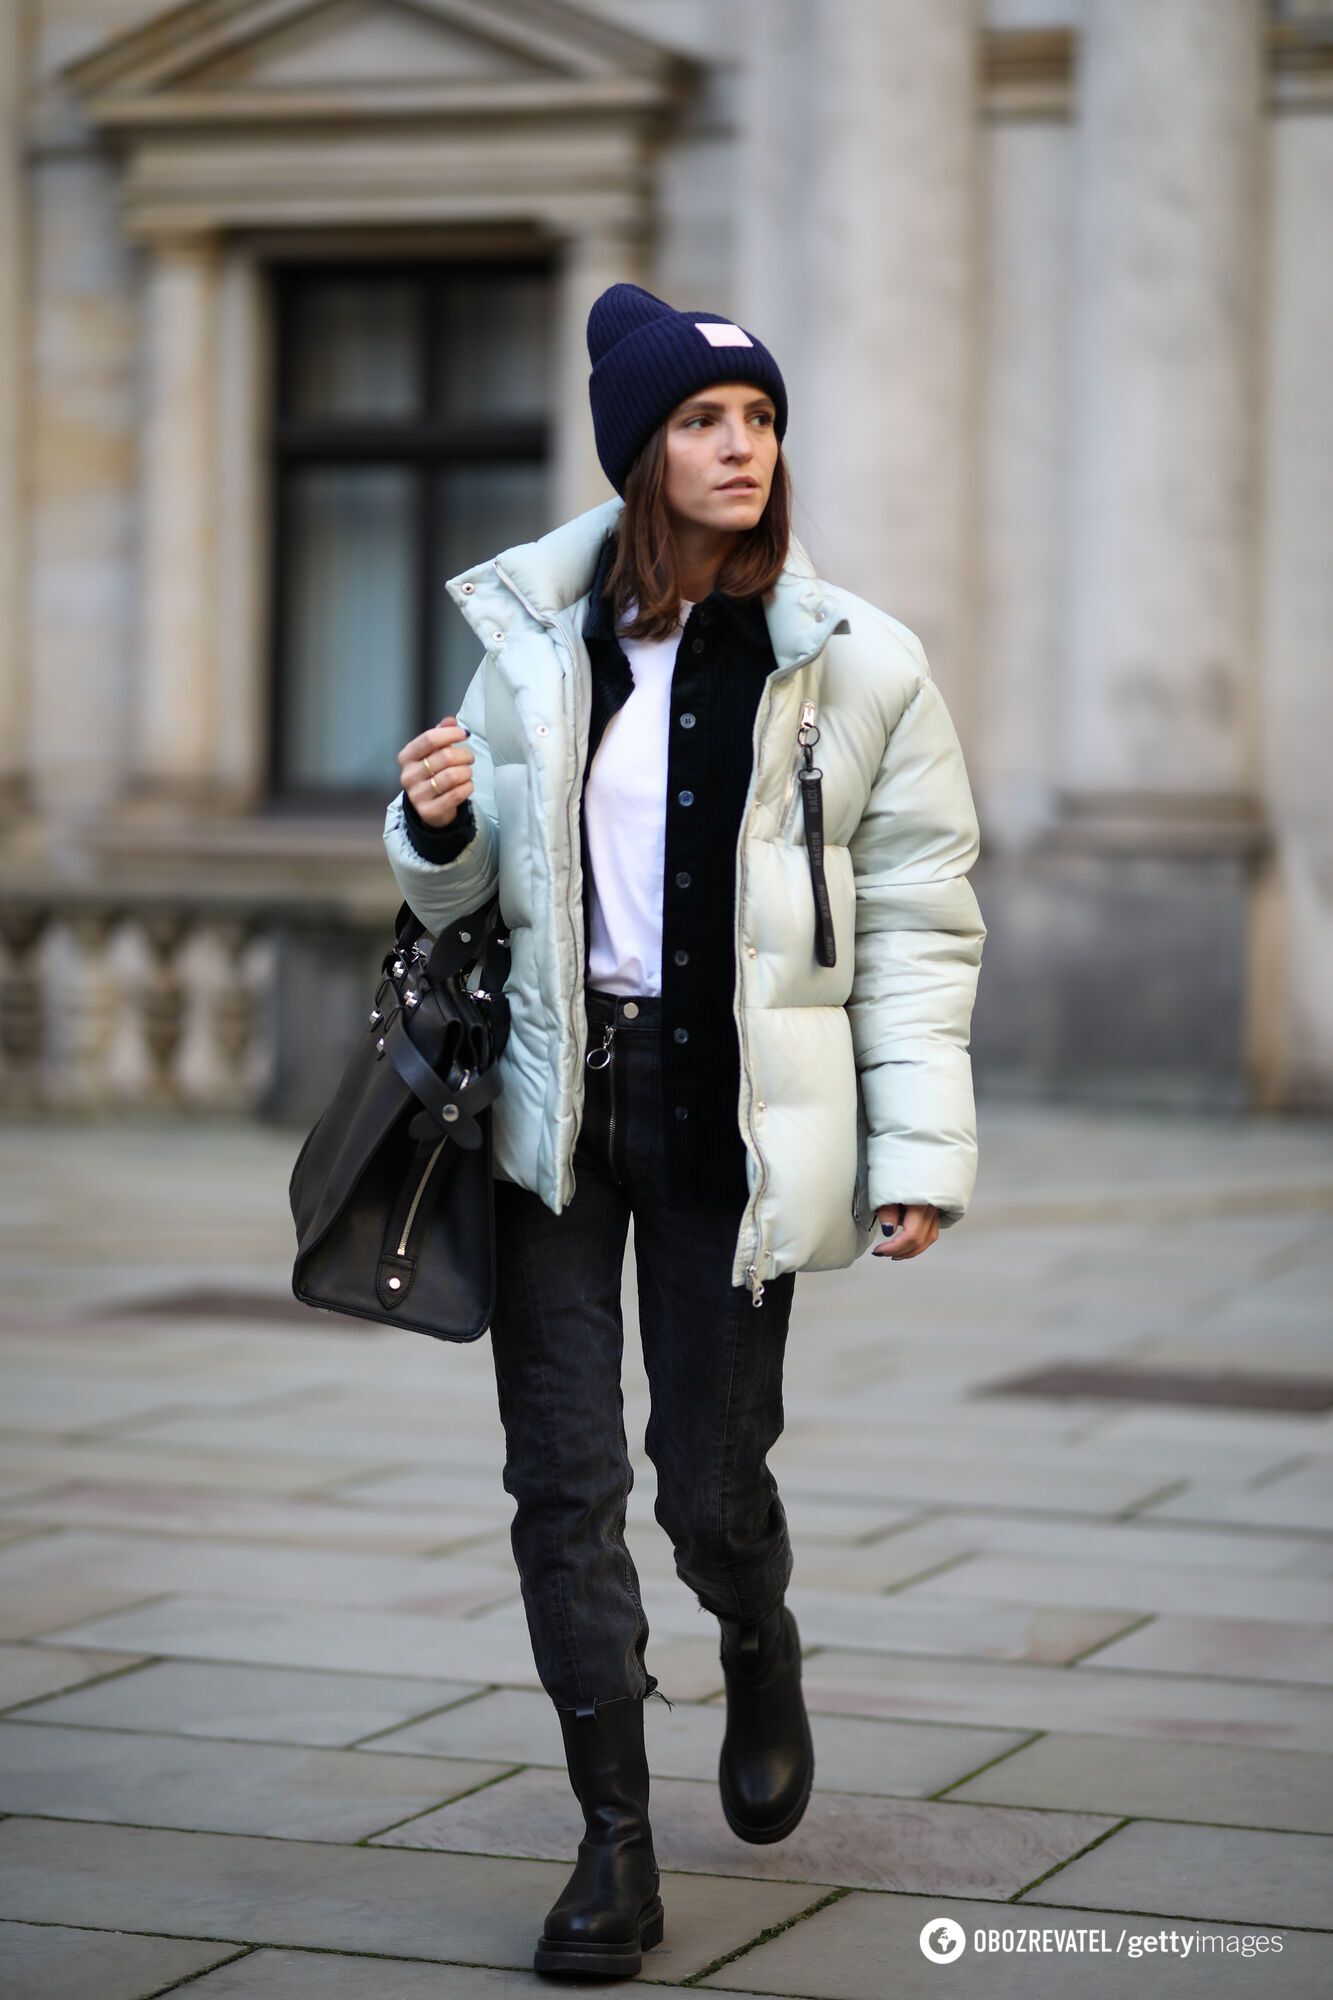 Warm and cozy: 5 most stylish hats for winter 2024